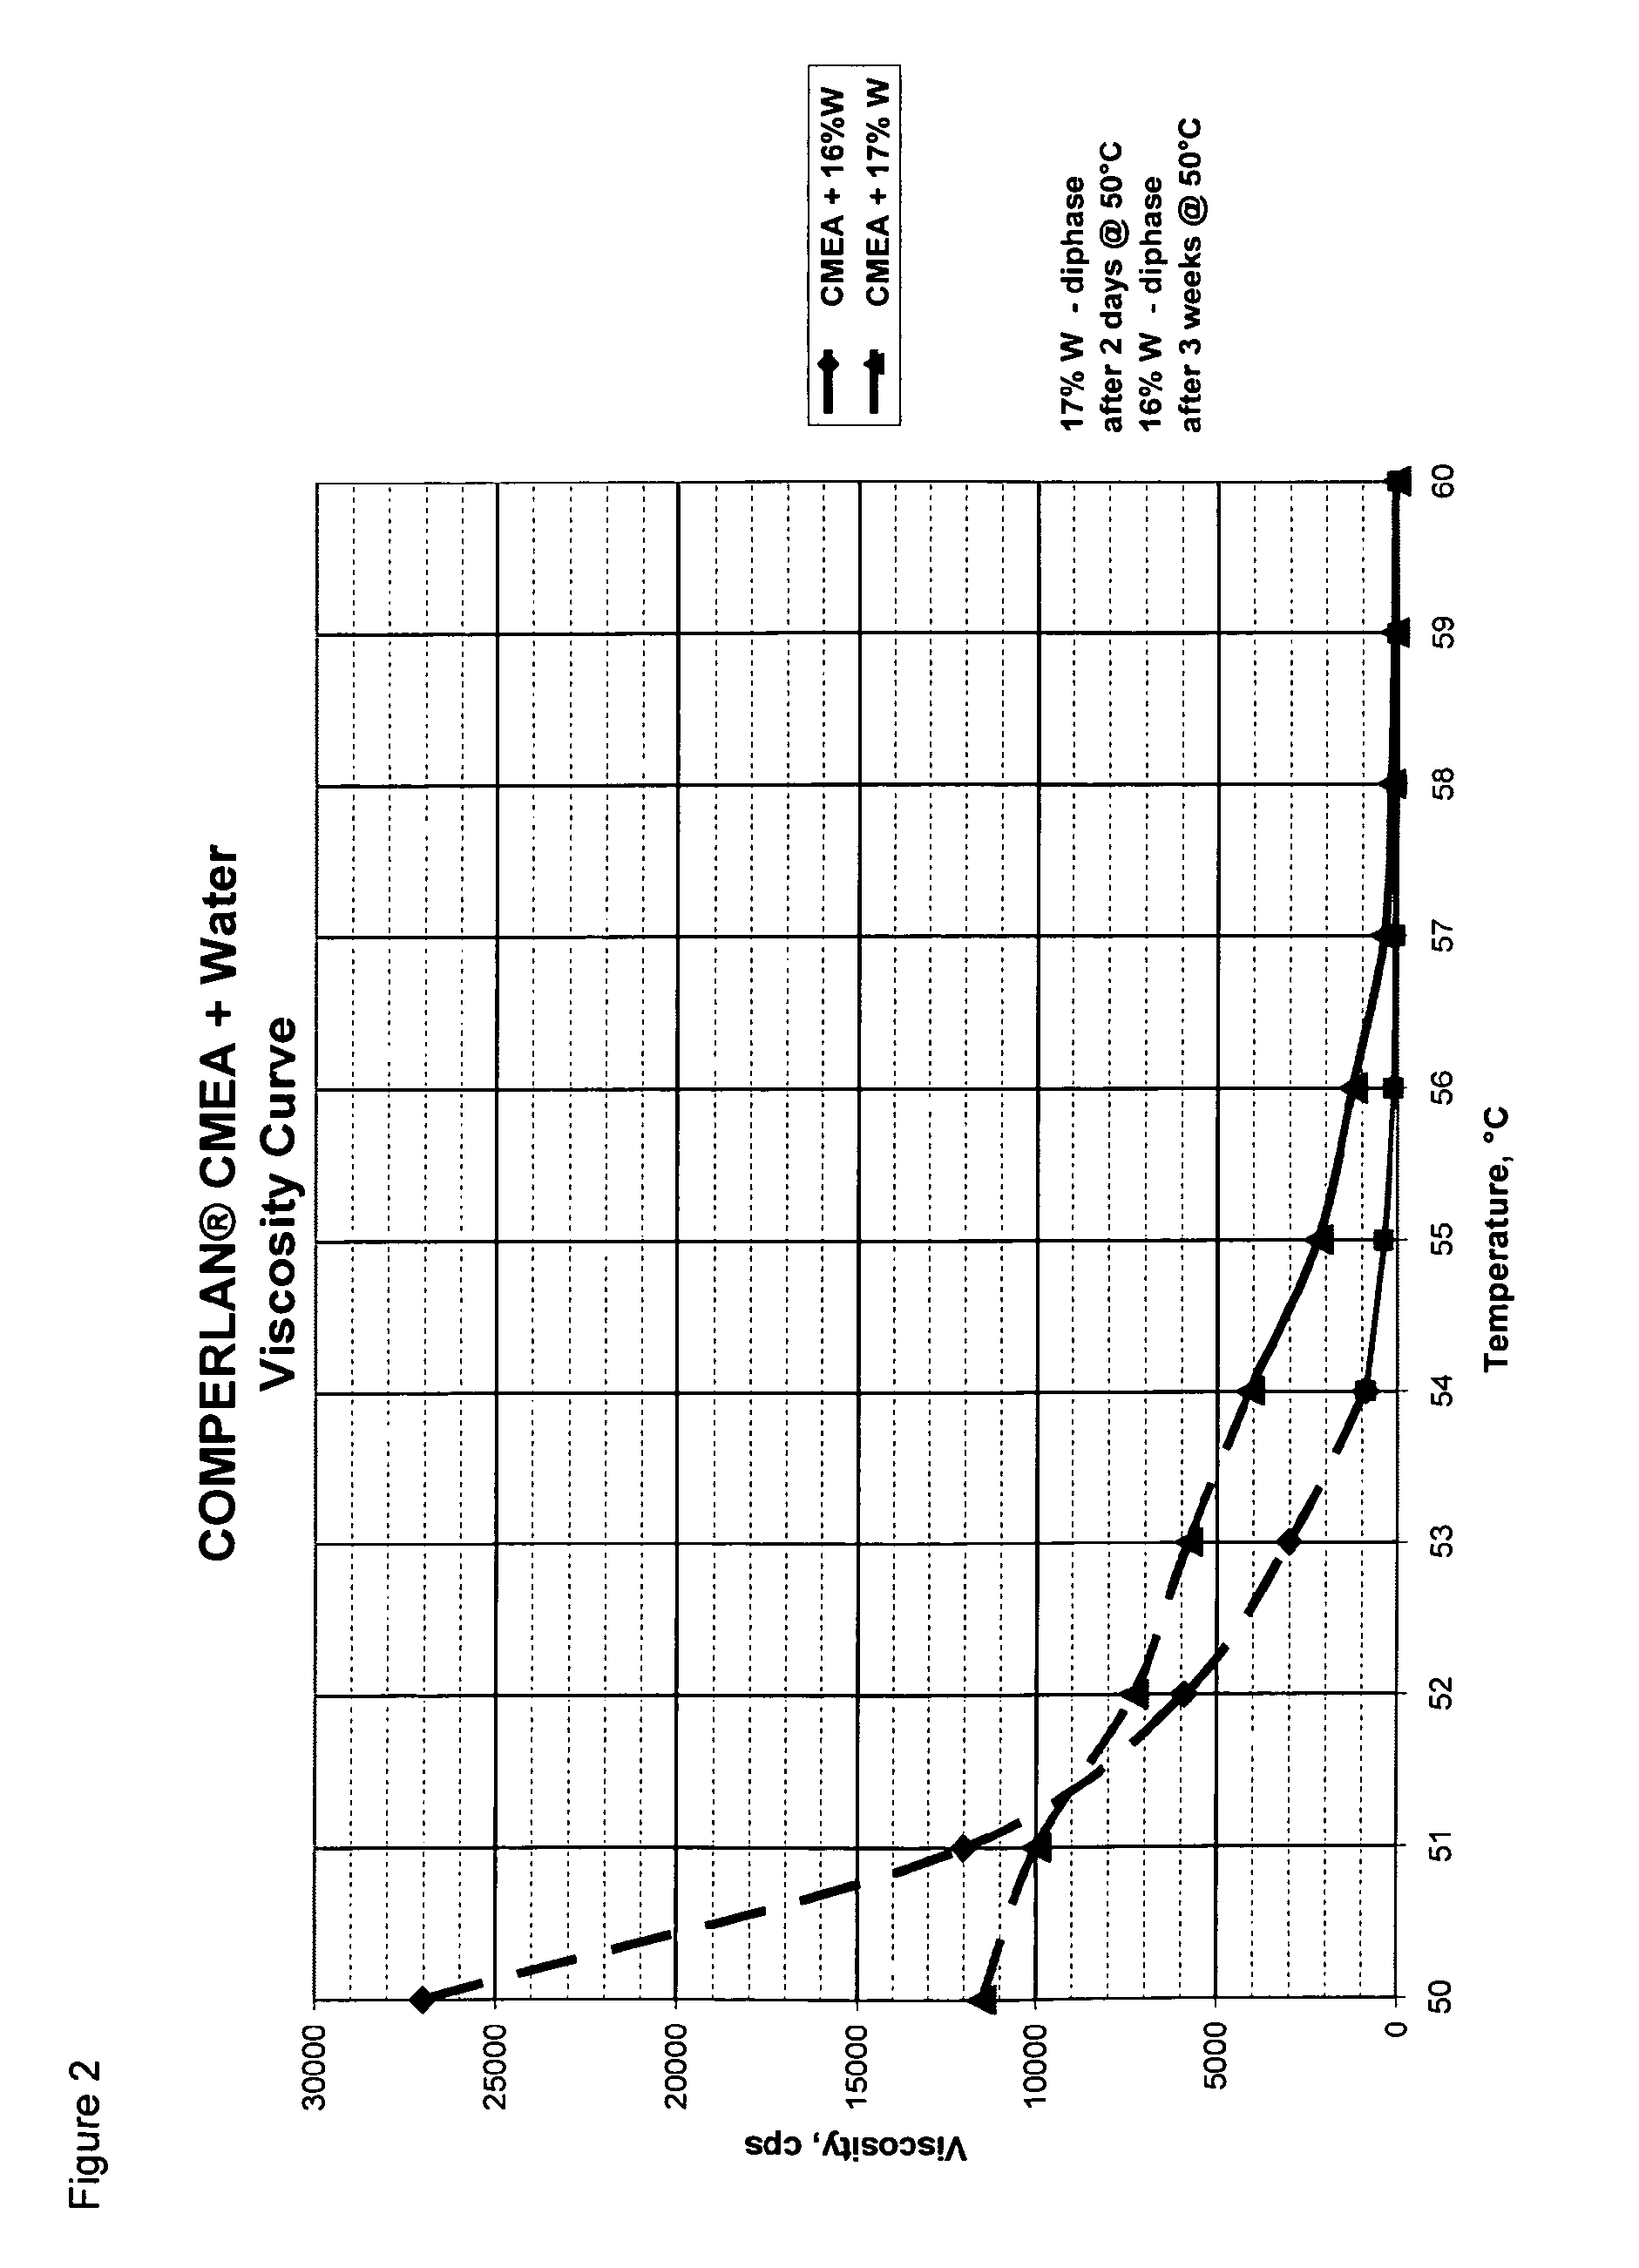 Fluid cocamide monoethanolamide concentrates and methods of preparation